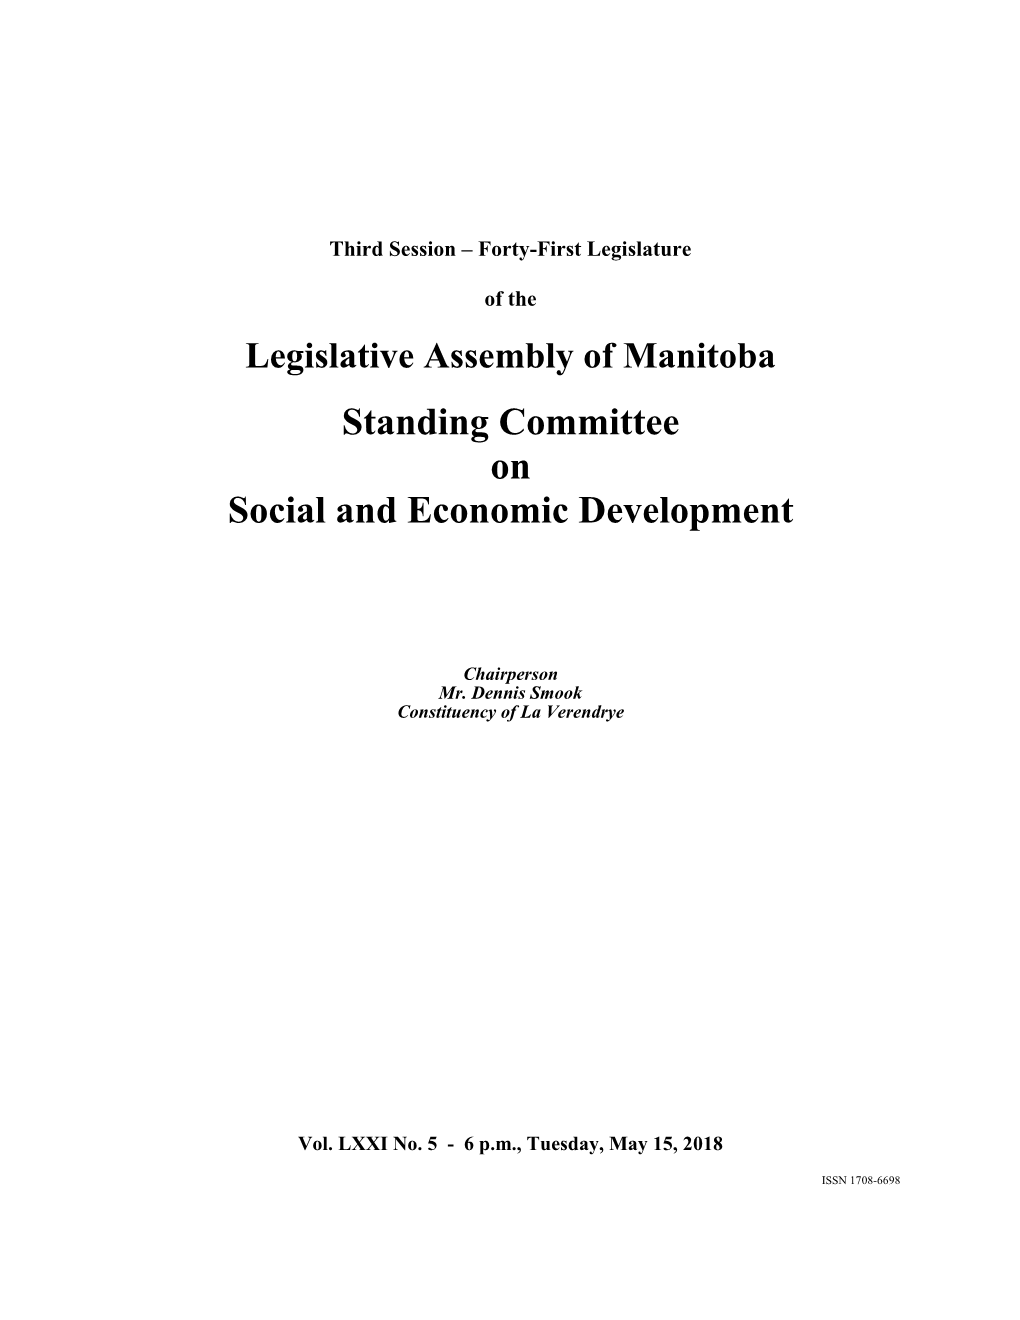 Standing Committee on Social and Economic Development